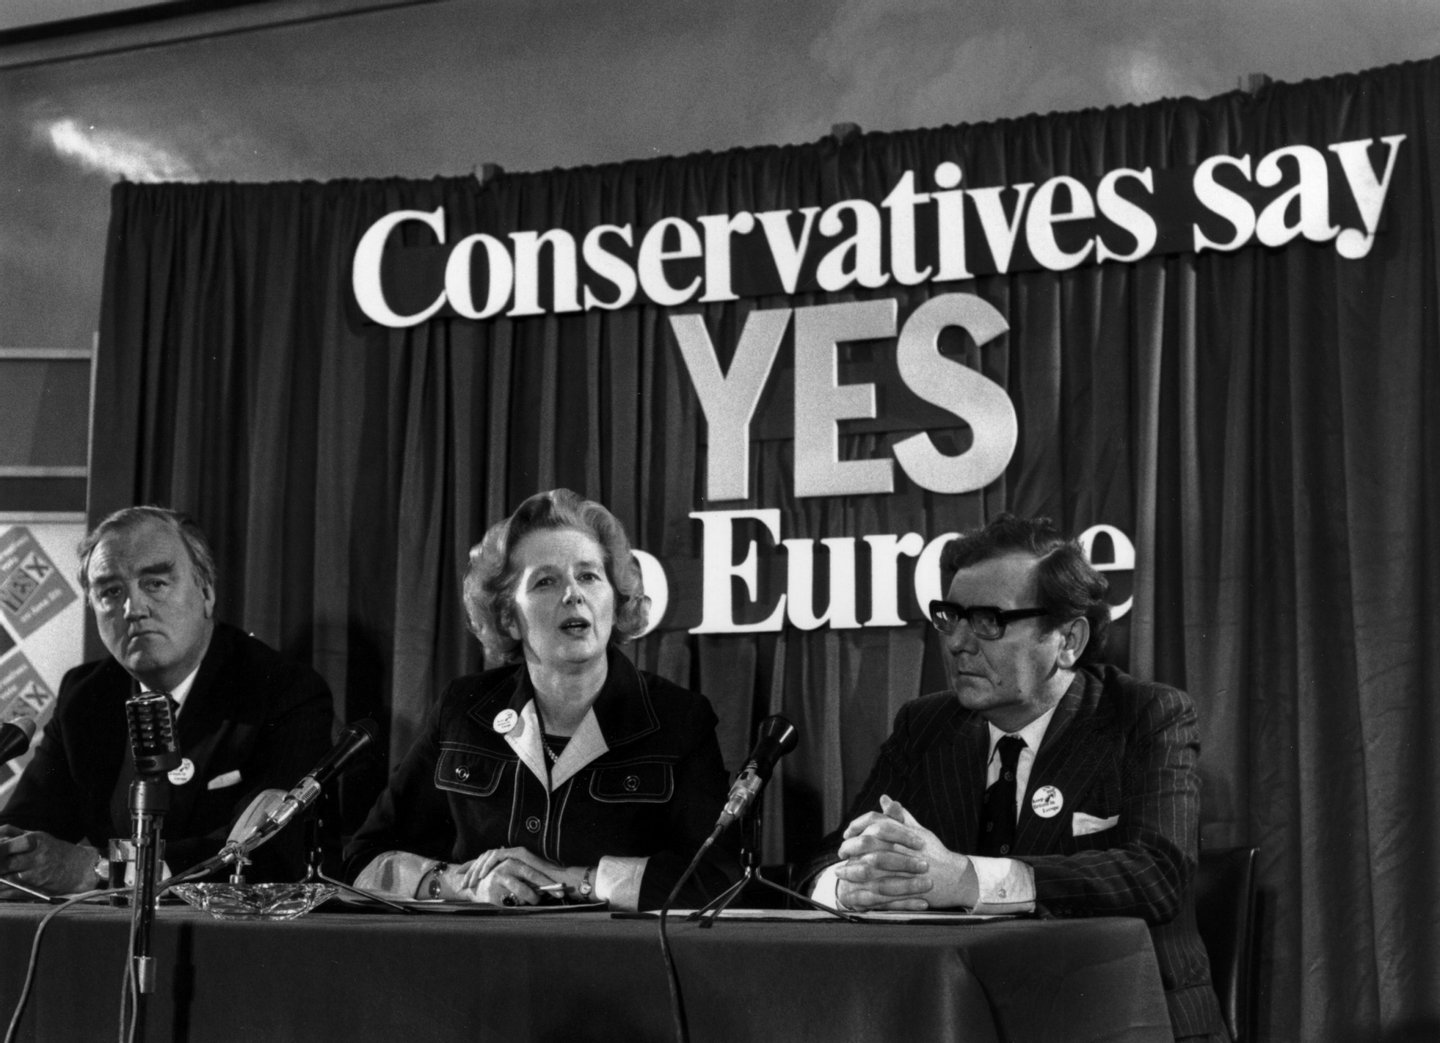 3rd June 1975: British conservative politician, Margaret Thatcher, with William Whitelaw and Peter Kirk at a referendum conference on Europe. (Photo by Keystone/Getty Images)